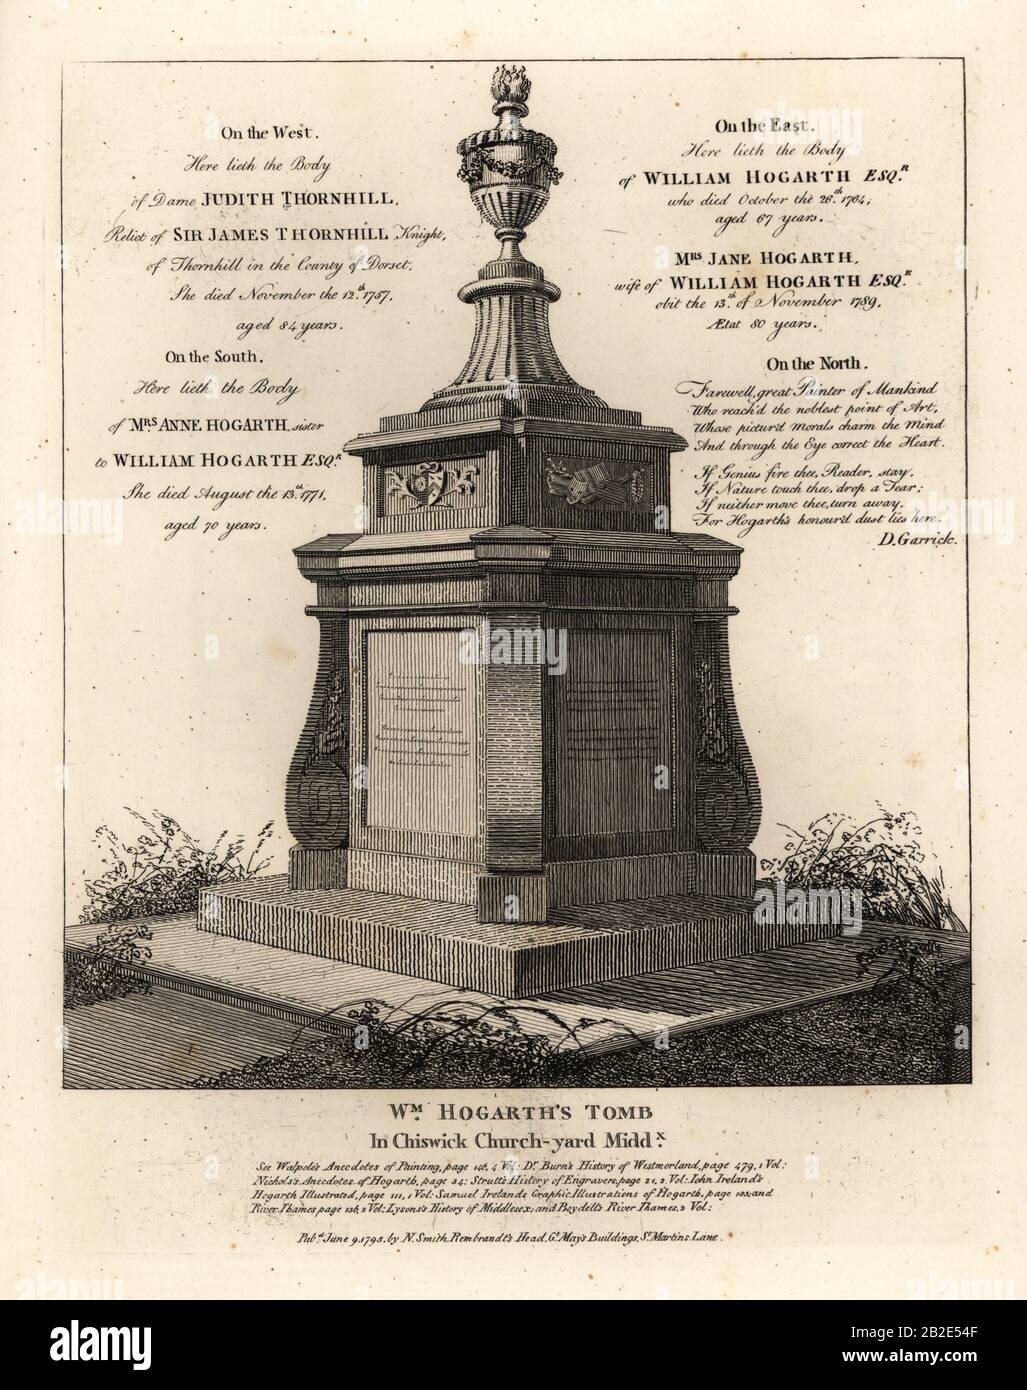 Tomb of artist William Hogarth, Chiswick churchyard, Middlesex. Copperplate engraving by John Thomas Smith after original drawings by members of the Society of Antiquaries from his J.T. Smith’s Antiquities of London and its Environs, J. Sewell, R. Folder, J. Simco, London, 1791. Stock Photo